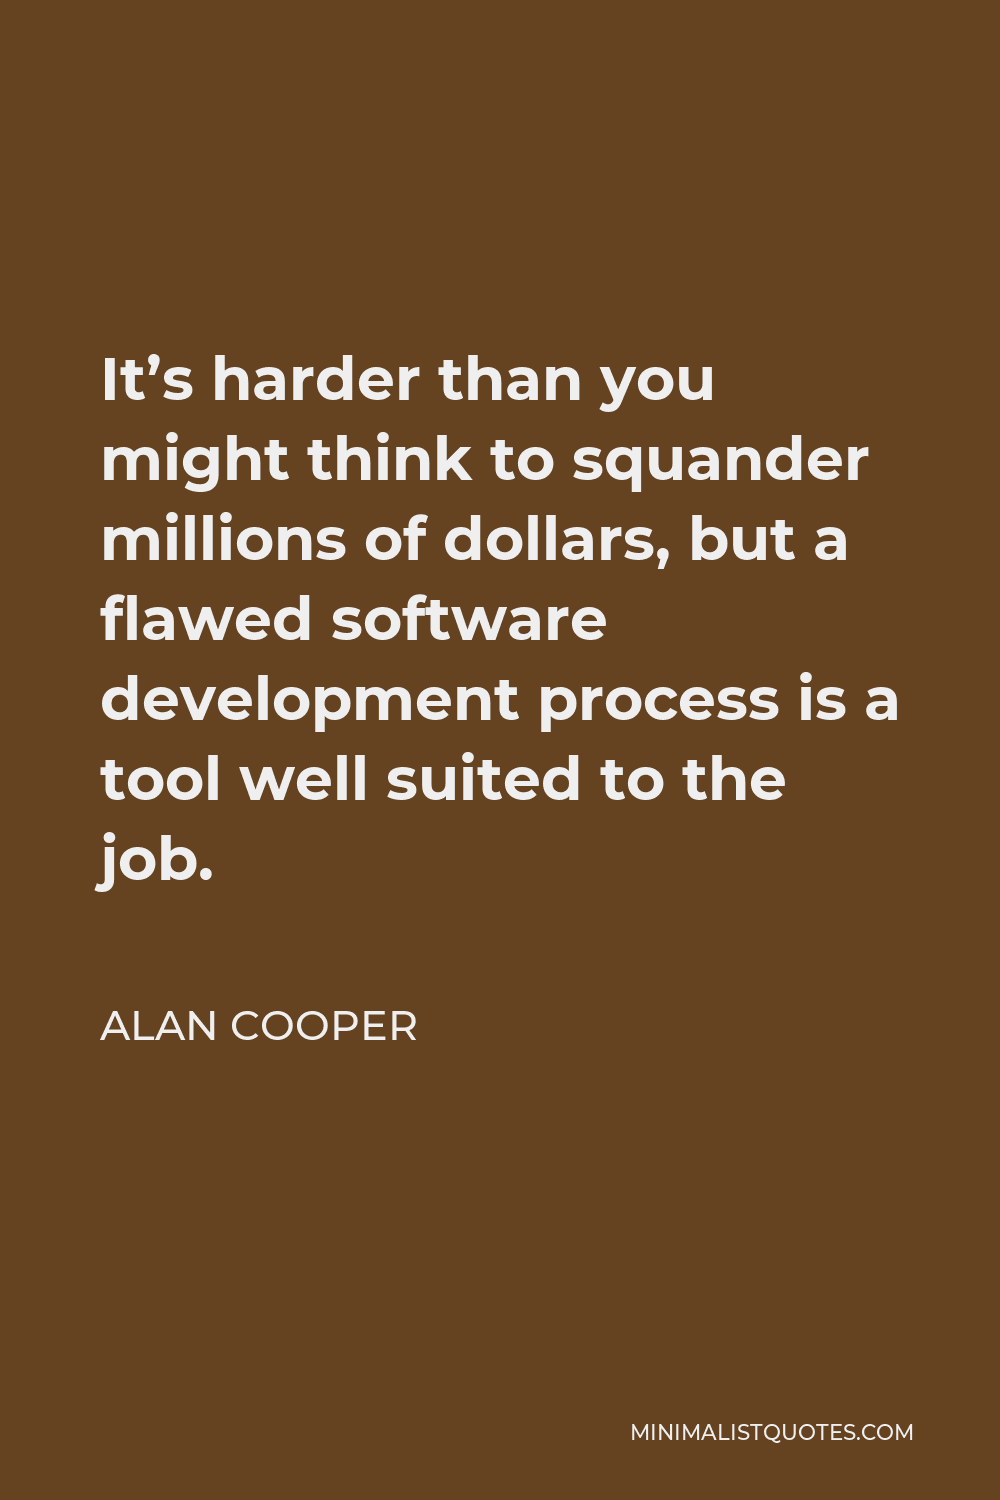 Alan Cooper Quote - It’s harder than you might think to squander millions of dollars, but a flawed software development process is a tool well suited to the job.